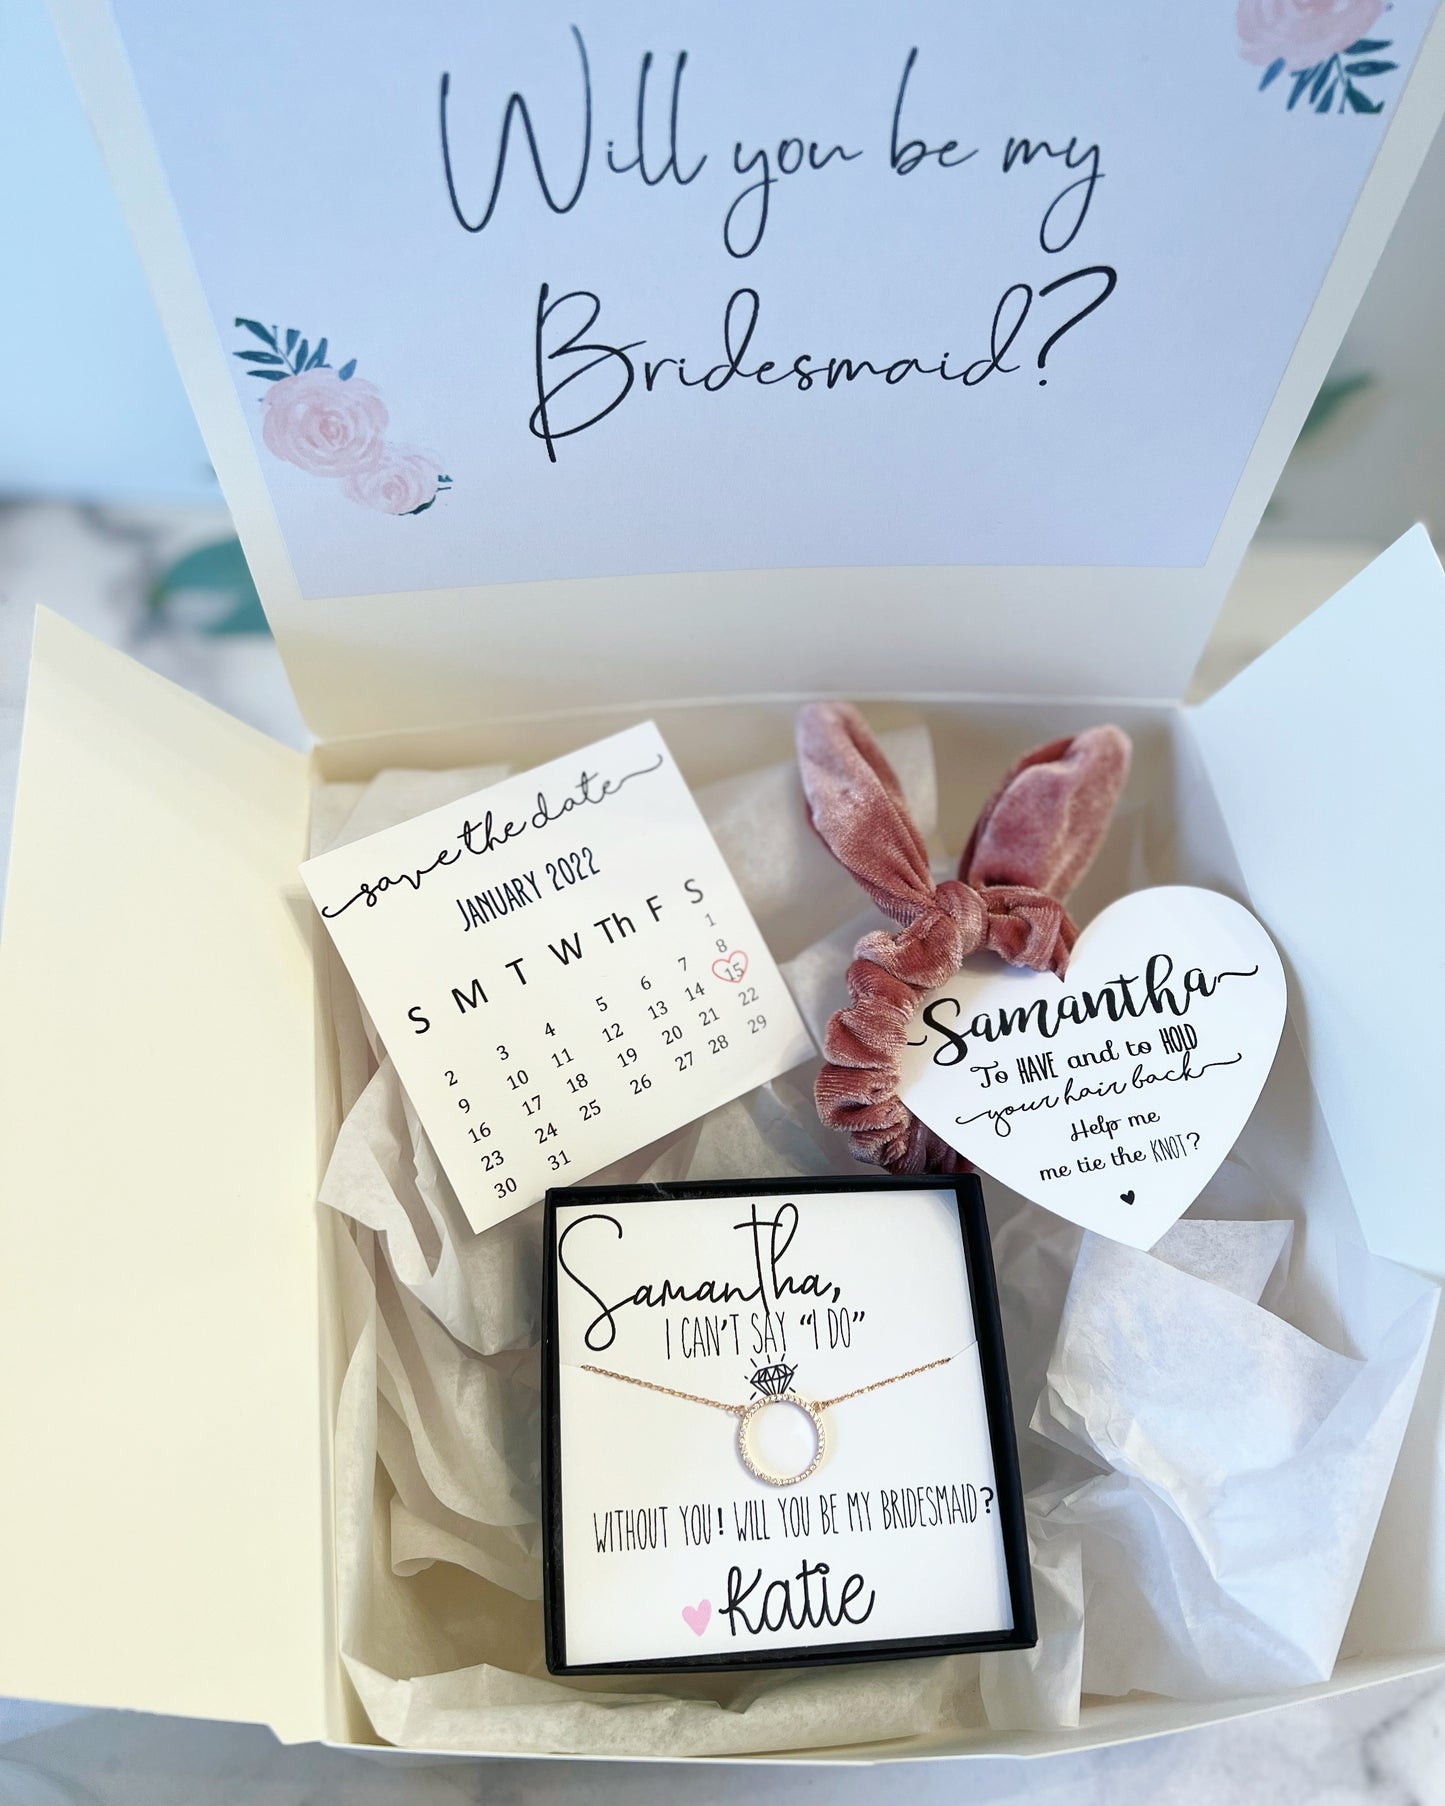 Proposal Box & Save the Date Card